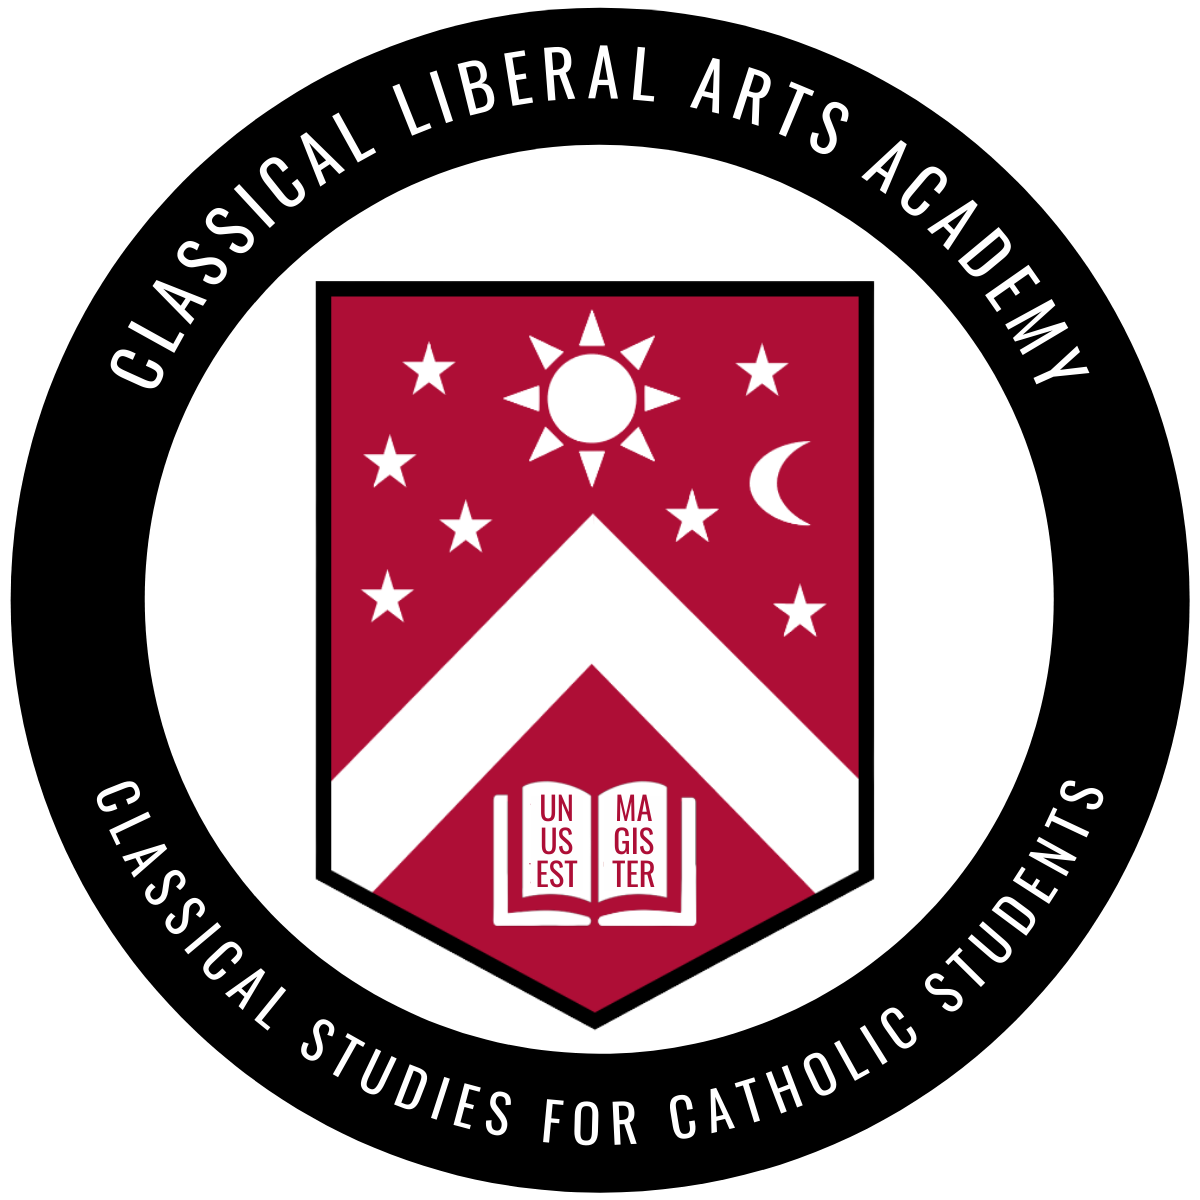 Art for CLAA Station ID by Classical Liberal Arts Academy